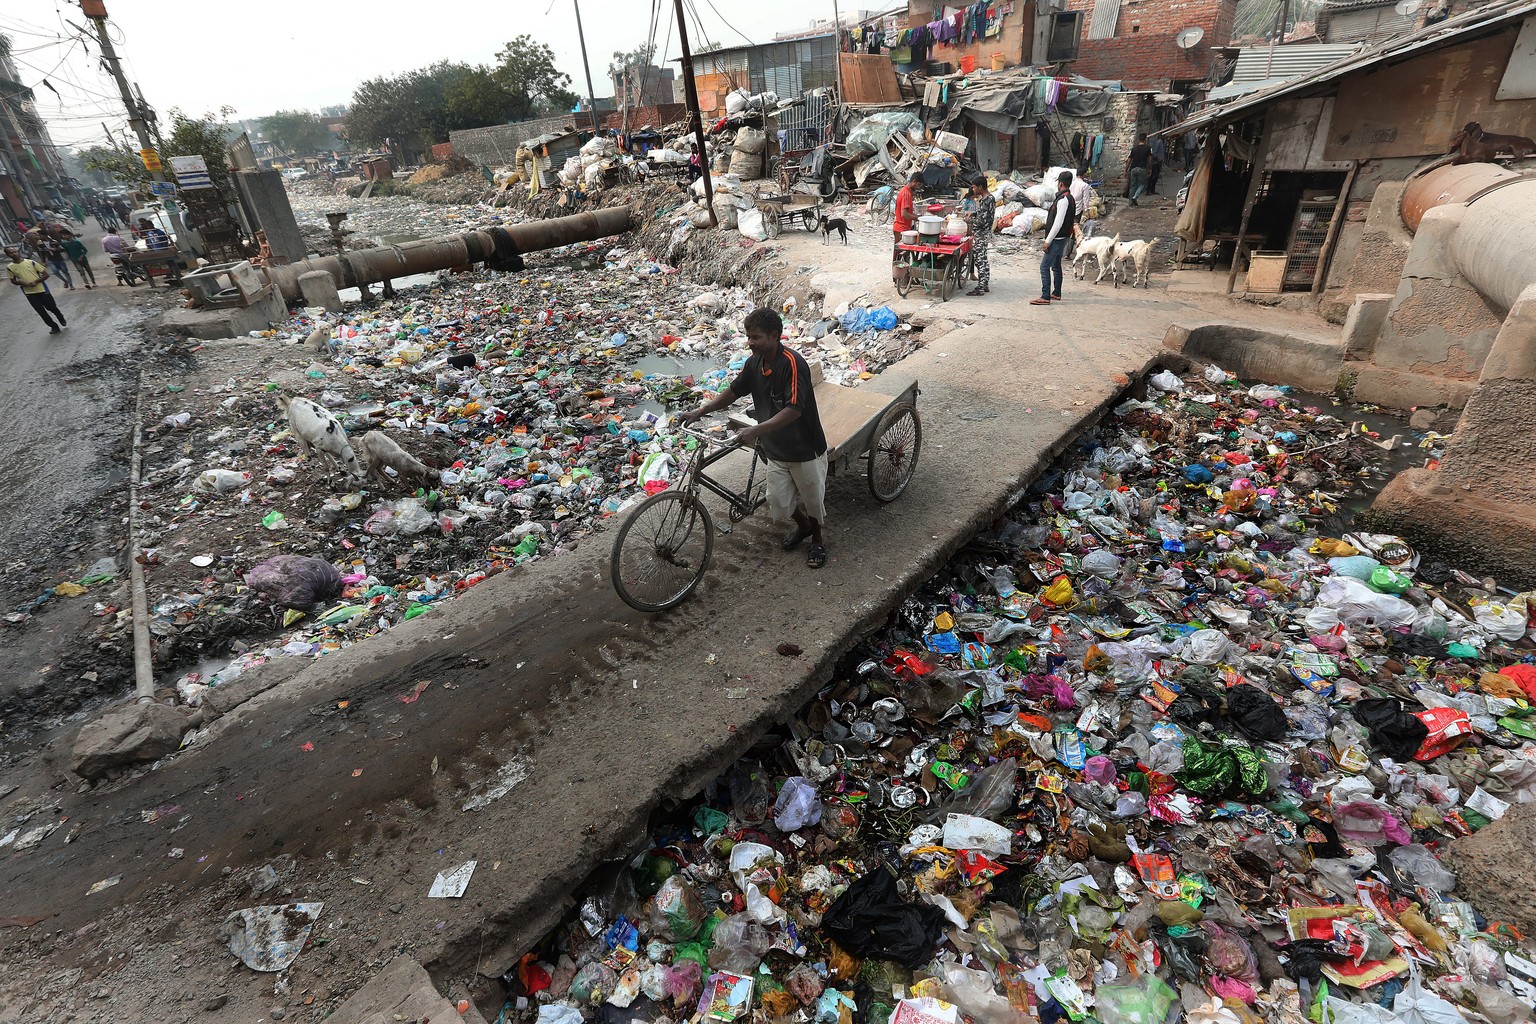 epa06426411 (24/27) View of domestic solid waste in a drain that leads to the polluted Yamuna river in New Delhi, India, 16 November 2017.
The Yamuna River, like all other holy rivers in India, has be ...